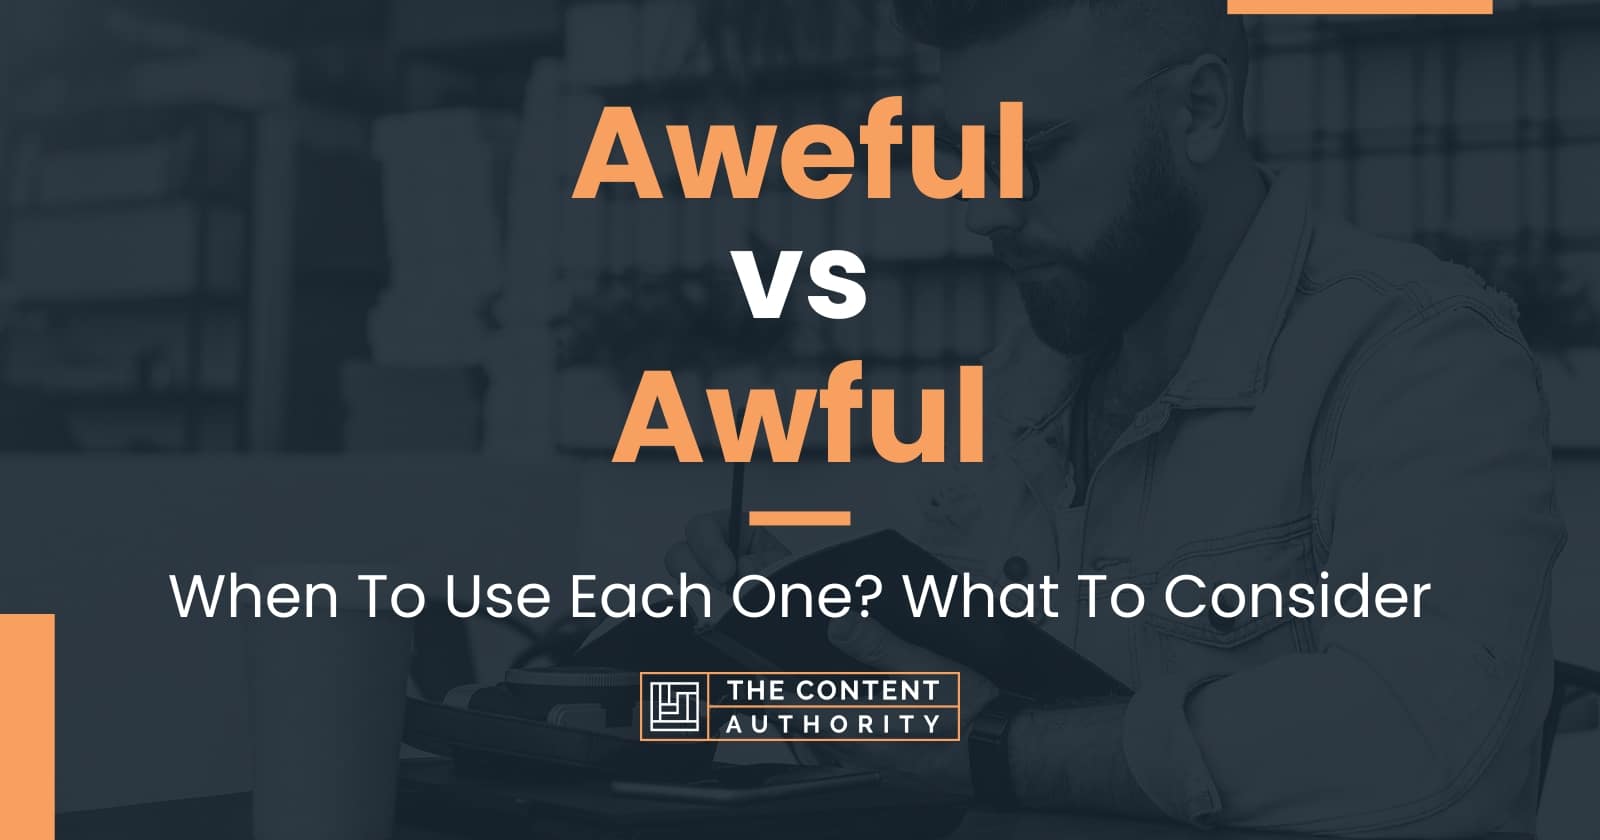 Aweful vs Awful: When To Use Each One? What To Consider